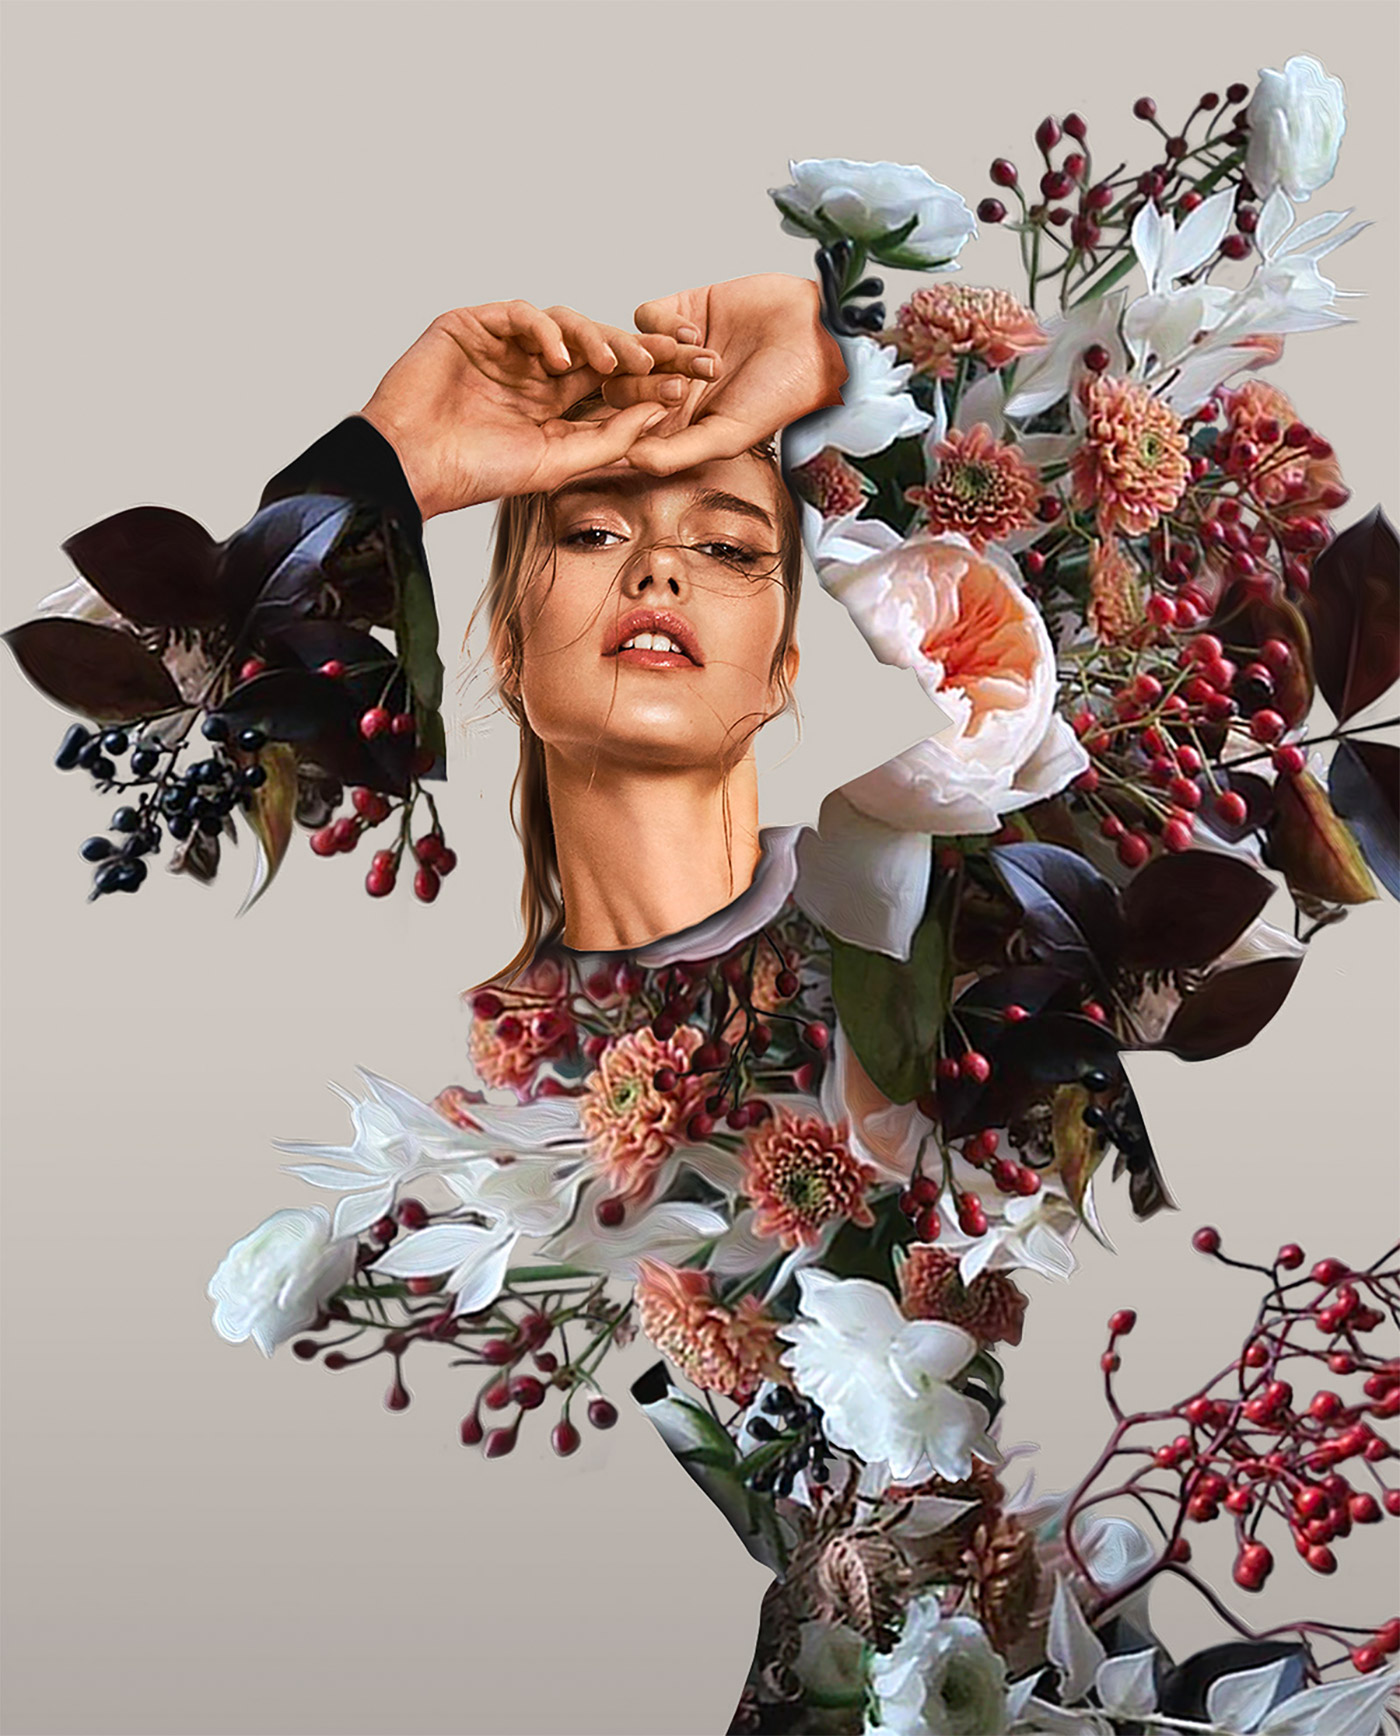 Nature Blooms From the Human Body in the Digital Collages of Charles Bentley Digital Art